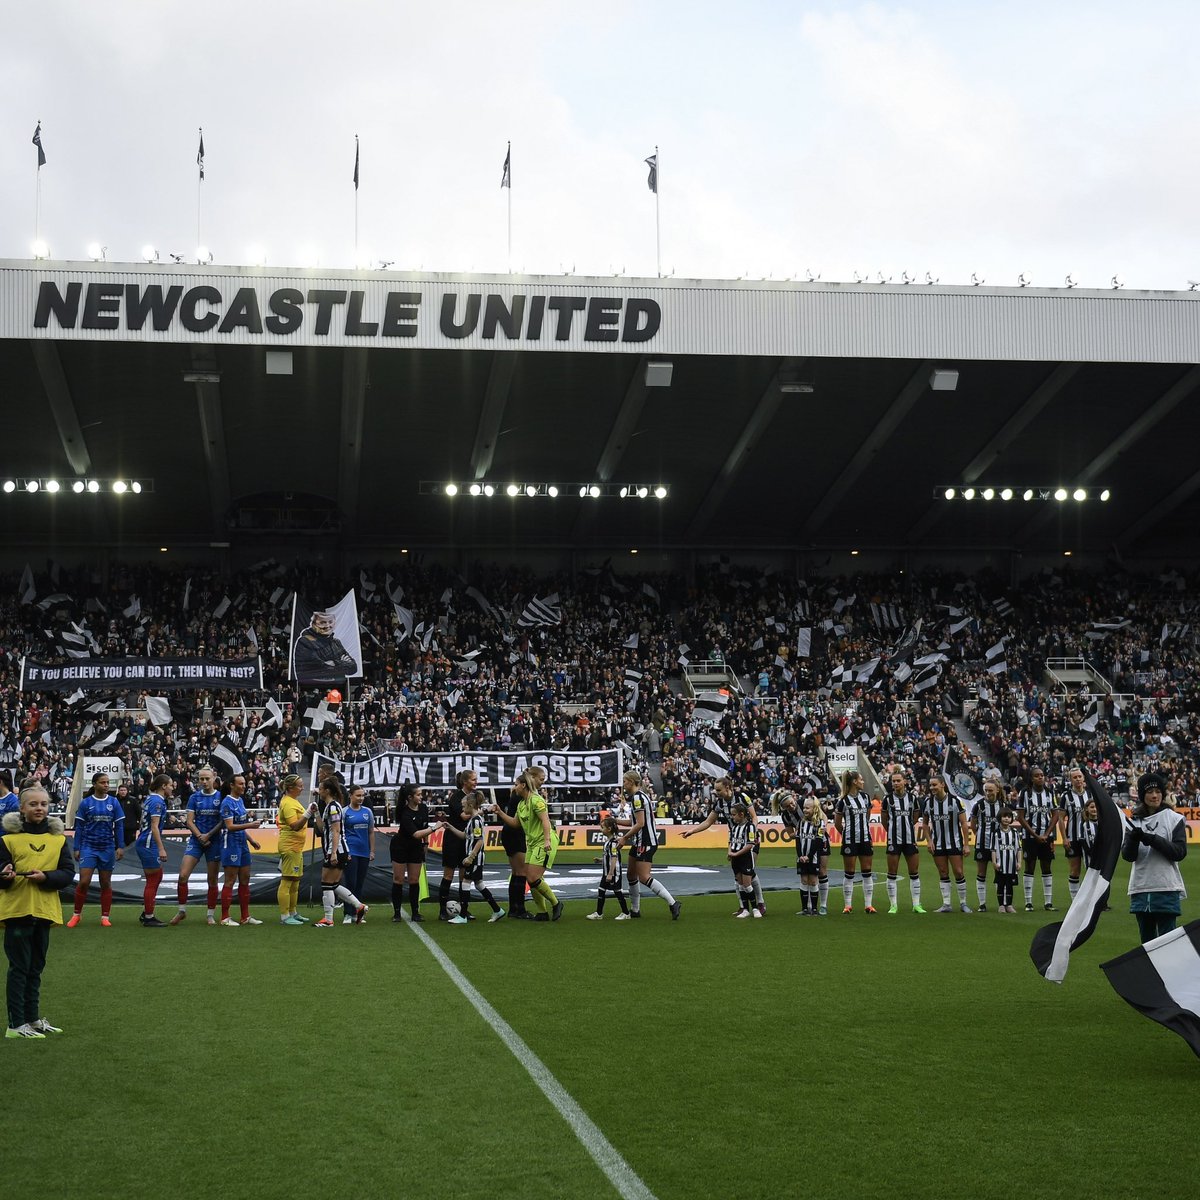 A very special moment walking out at St James’ Park in front of over 20,000 fans on Sunday. 🏟️ Bring on the final! 💃